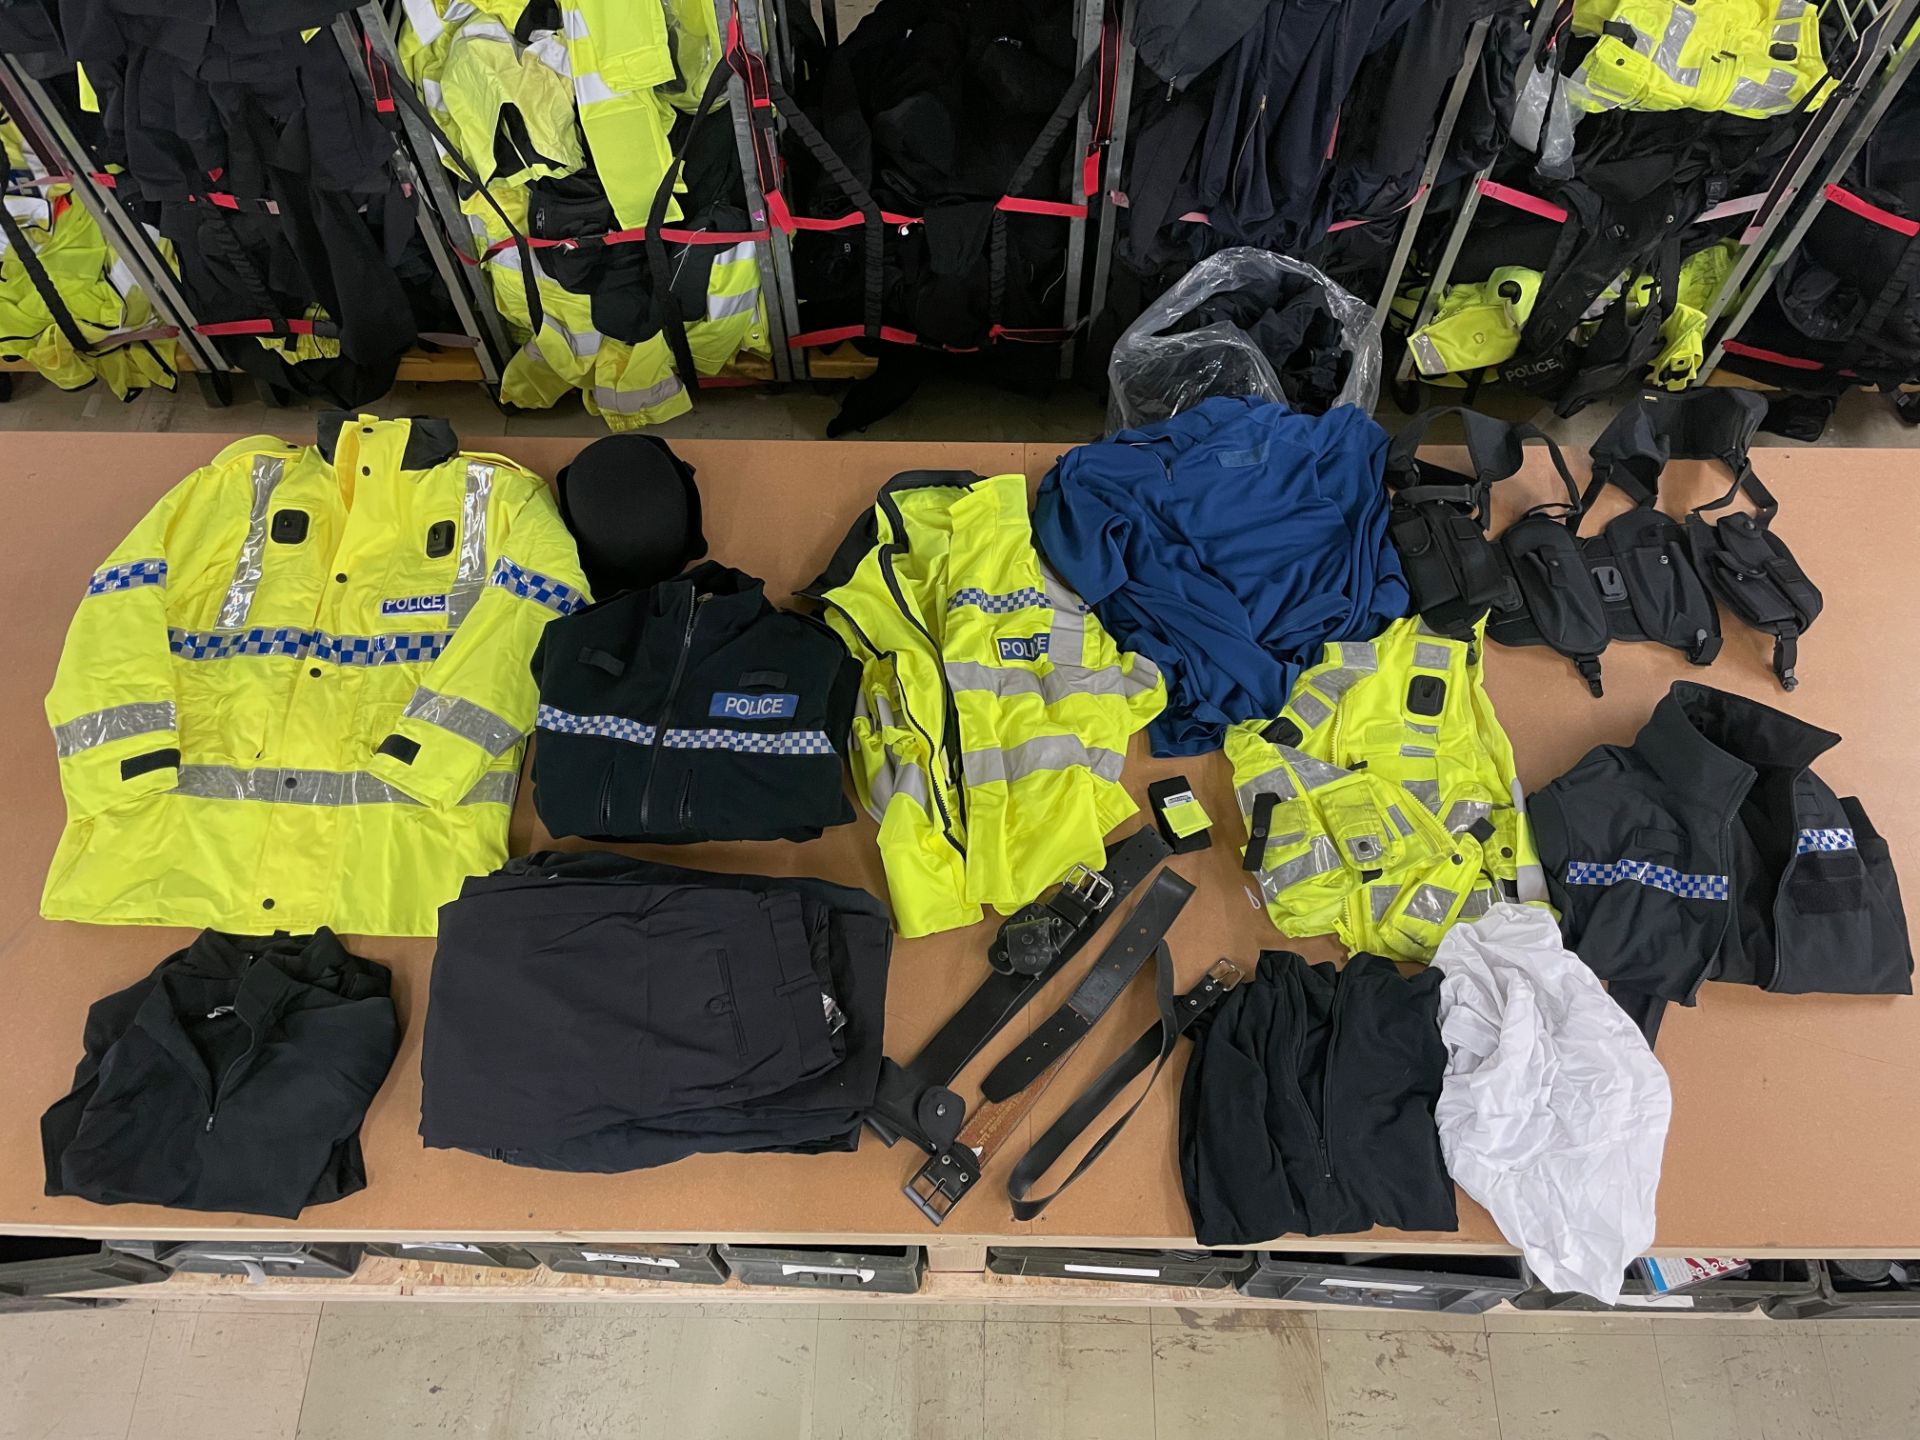 5 X BAGS STUFFED WITH EX POLICE UNIFORM CLOTHING & ACCESSORIES - RRP £1375.00 - NO VAT ON HAMMER - Bild 11 aus 12